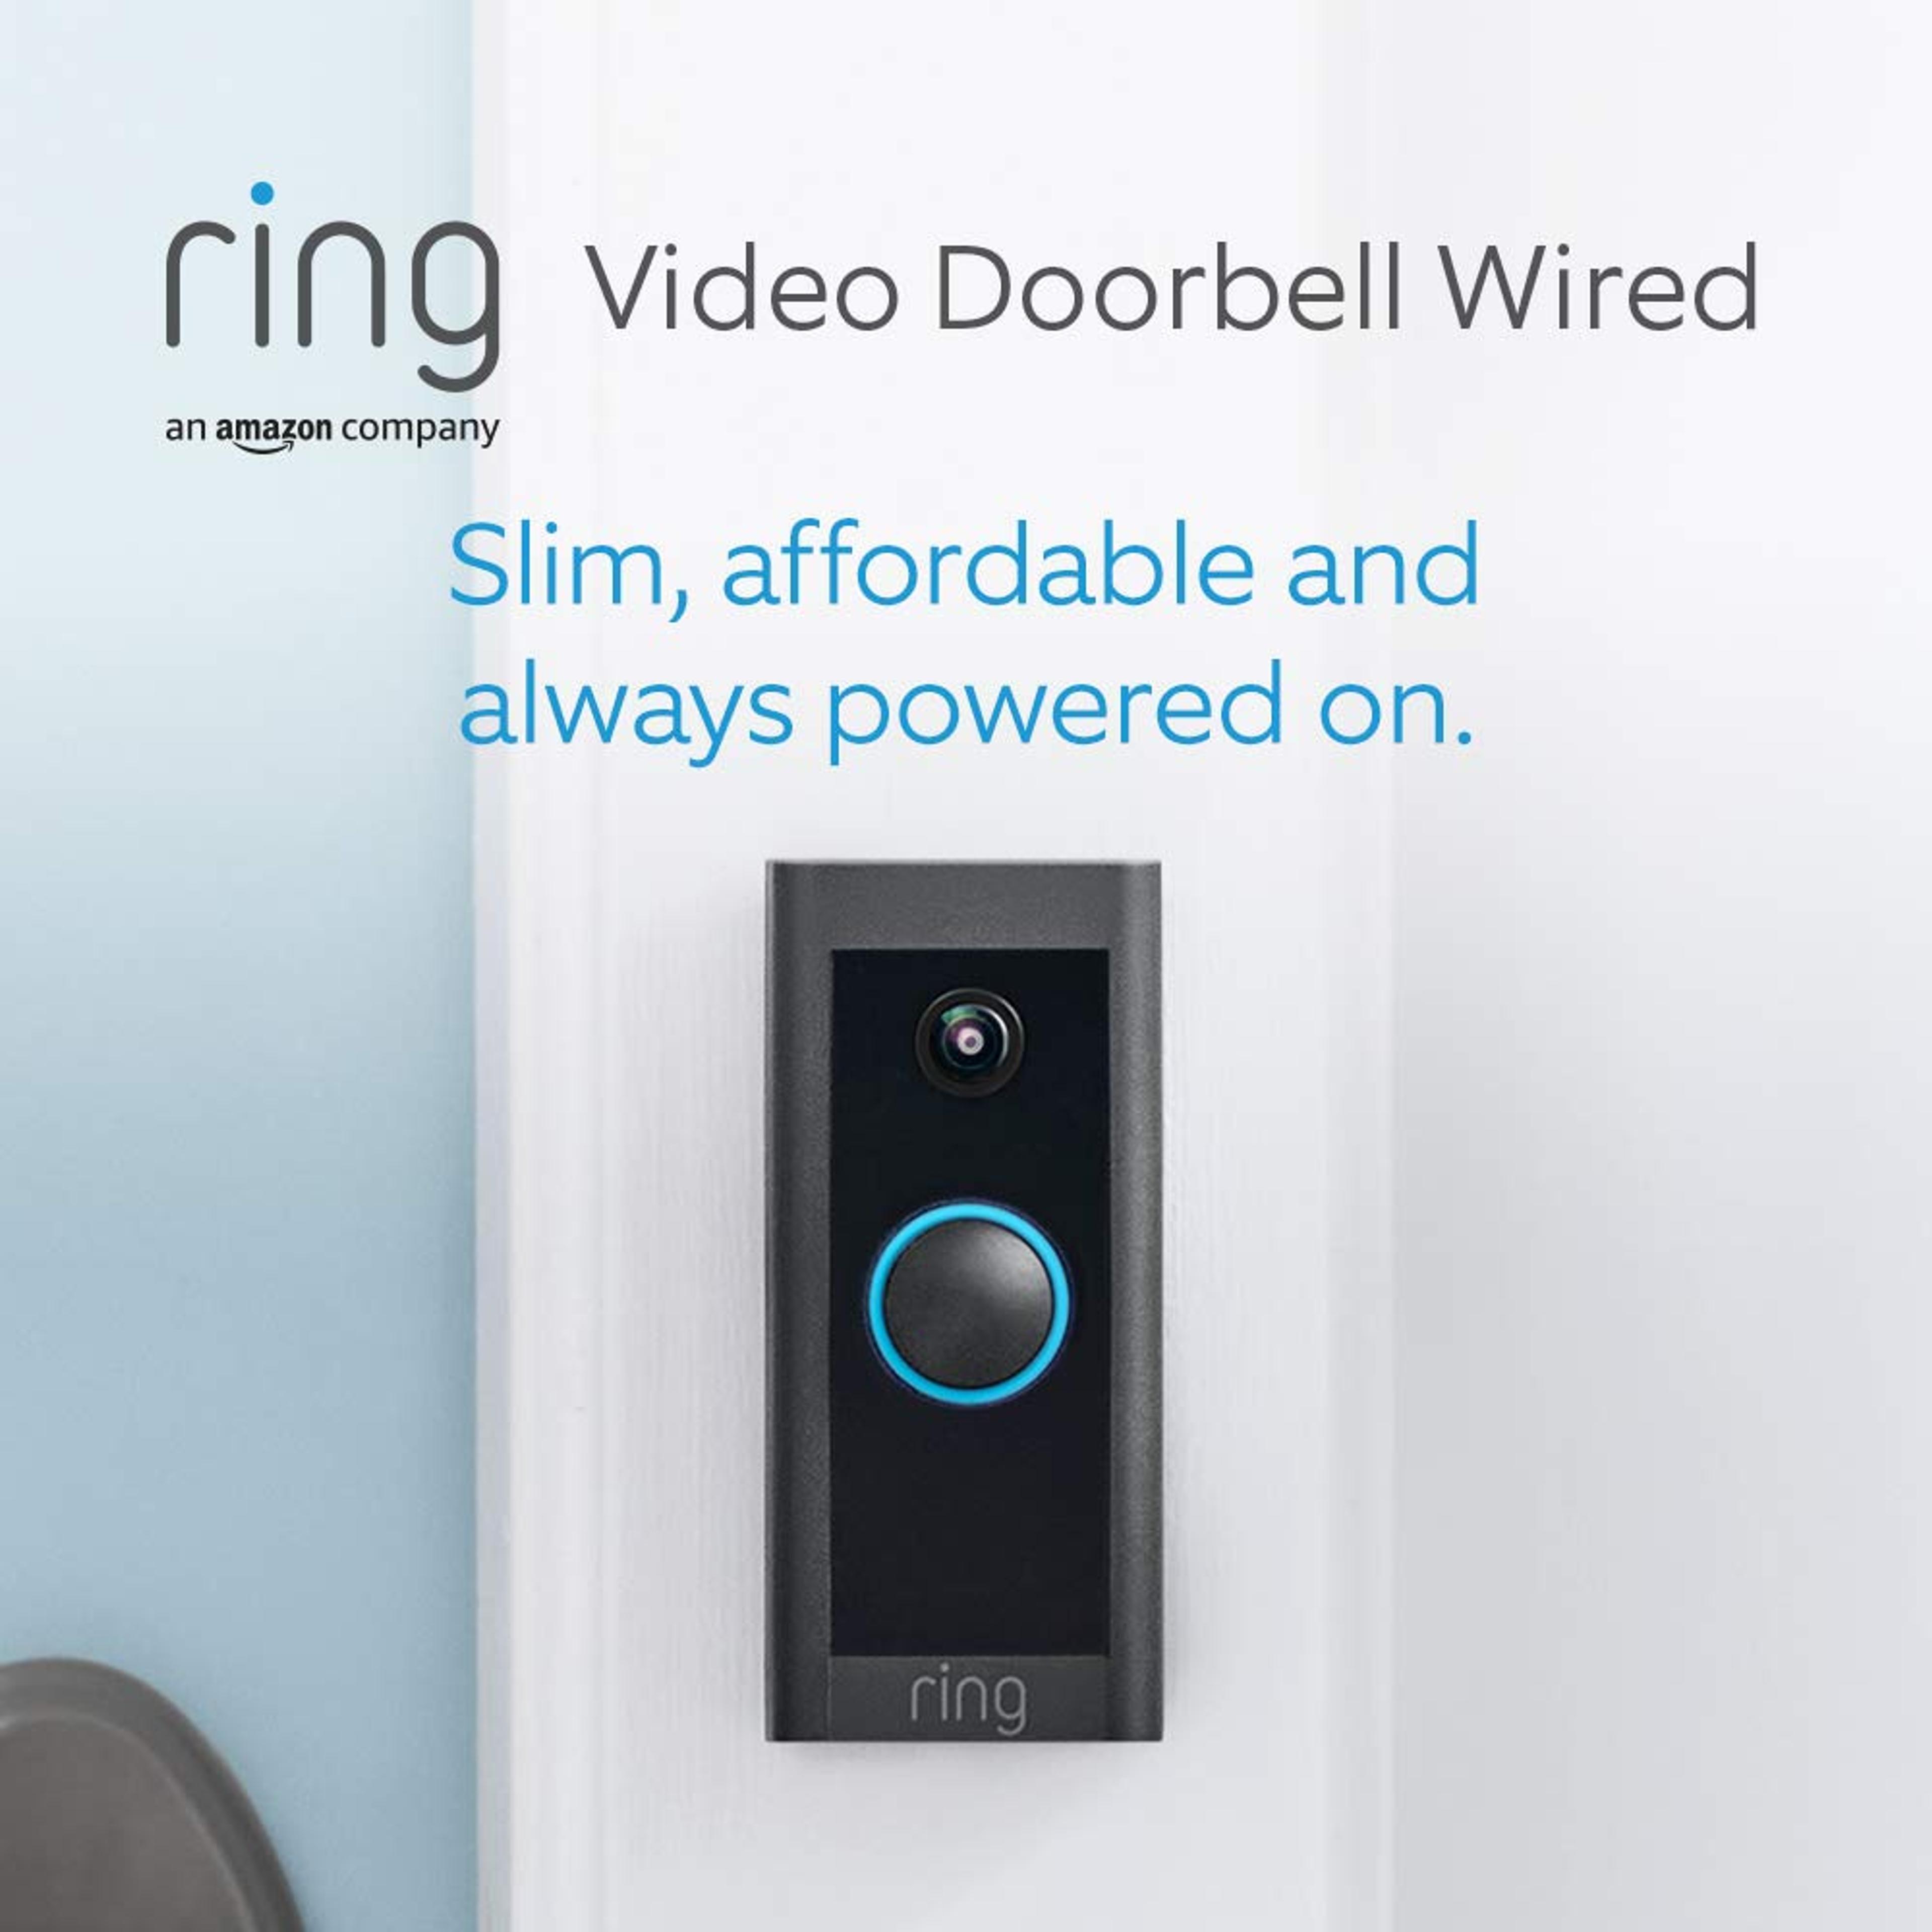 Ring Video Doorbell Wired, by Amazon | Doorbell camera with 1080p HD Video, Advanced Motion Detection, wired installation (existing doorbell wiring required) | 30-day free trial of Ring Protect Plan : Amazon.co.uk: DIY & Tools